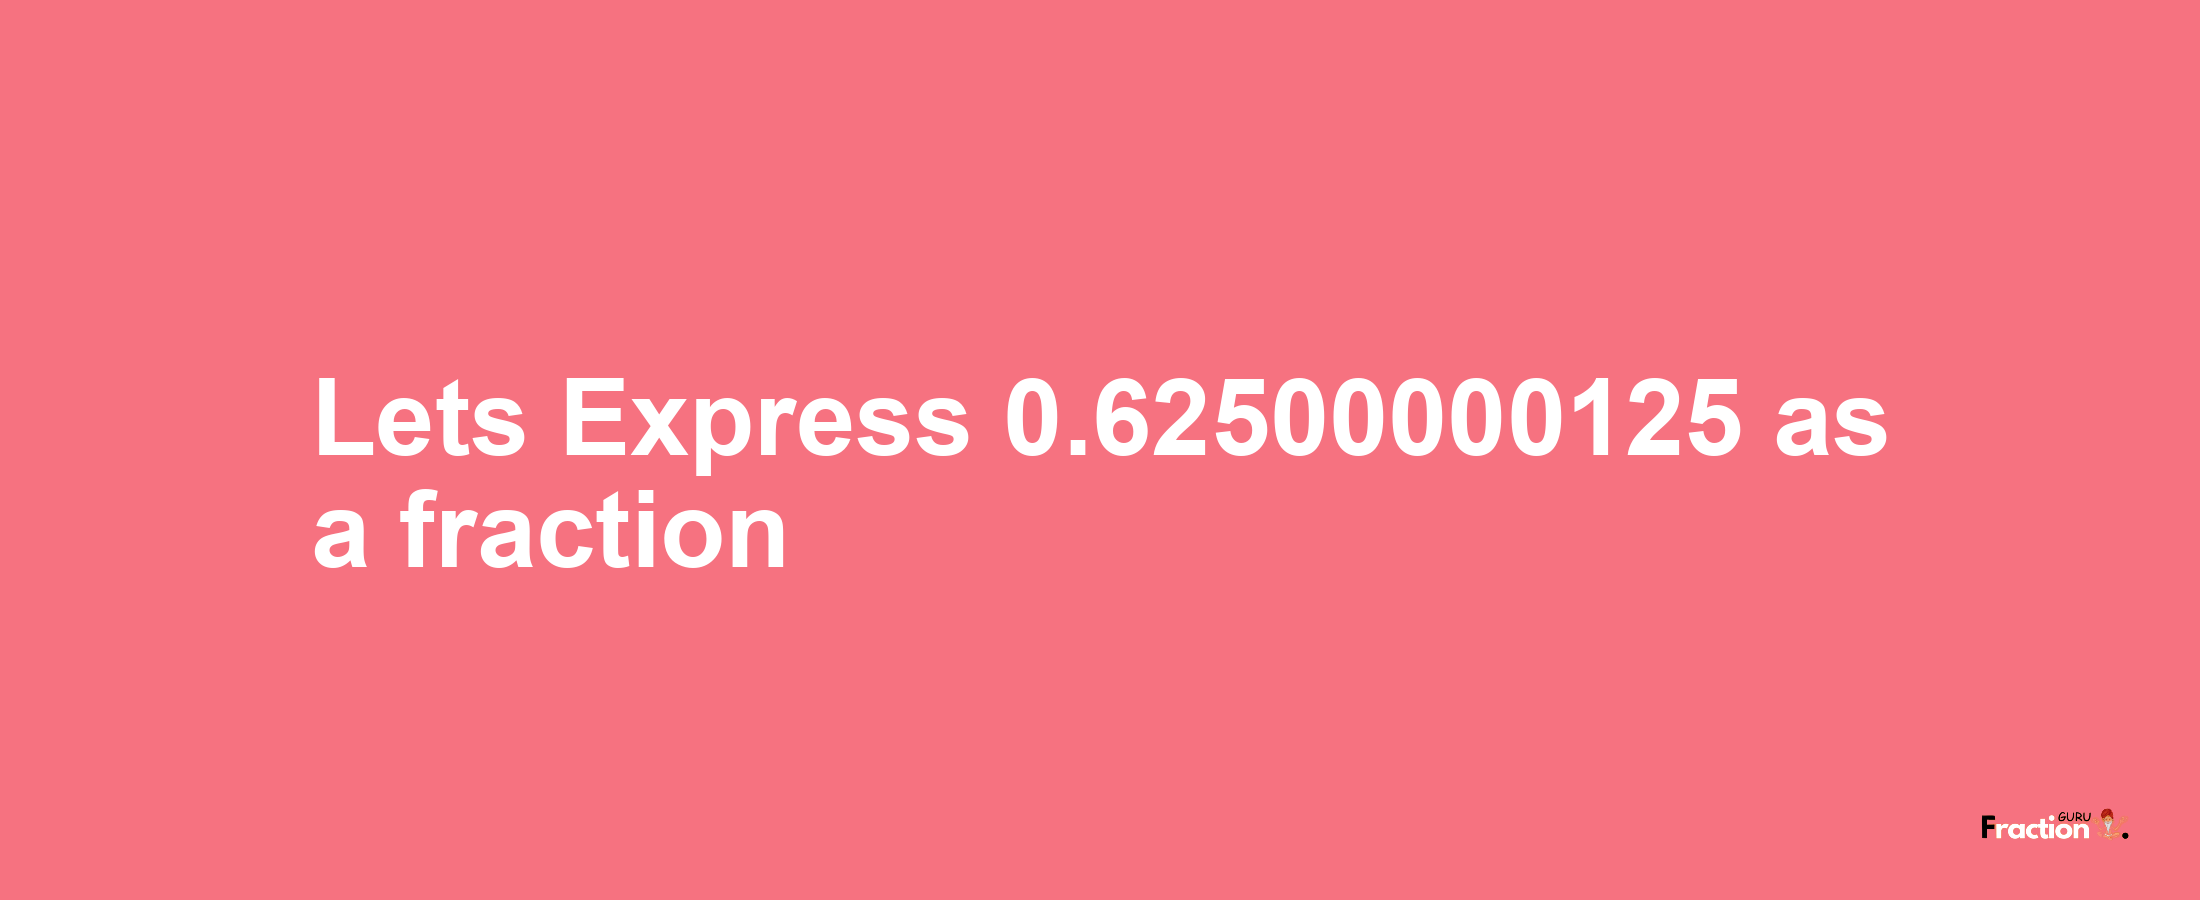 Lets Express 0.62500000125 as afraction